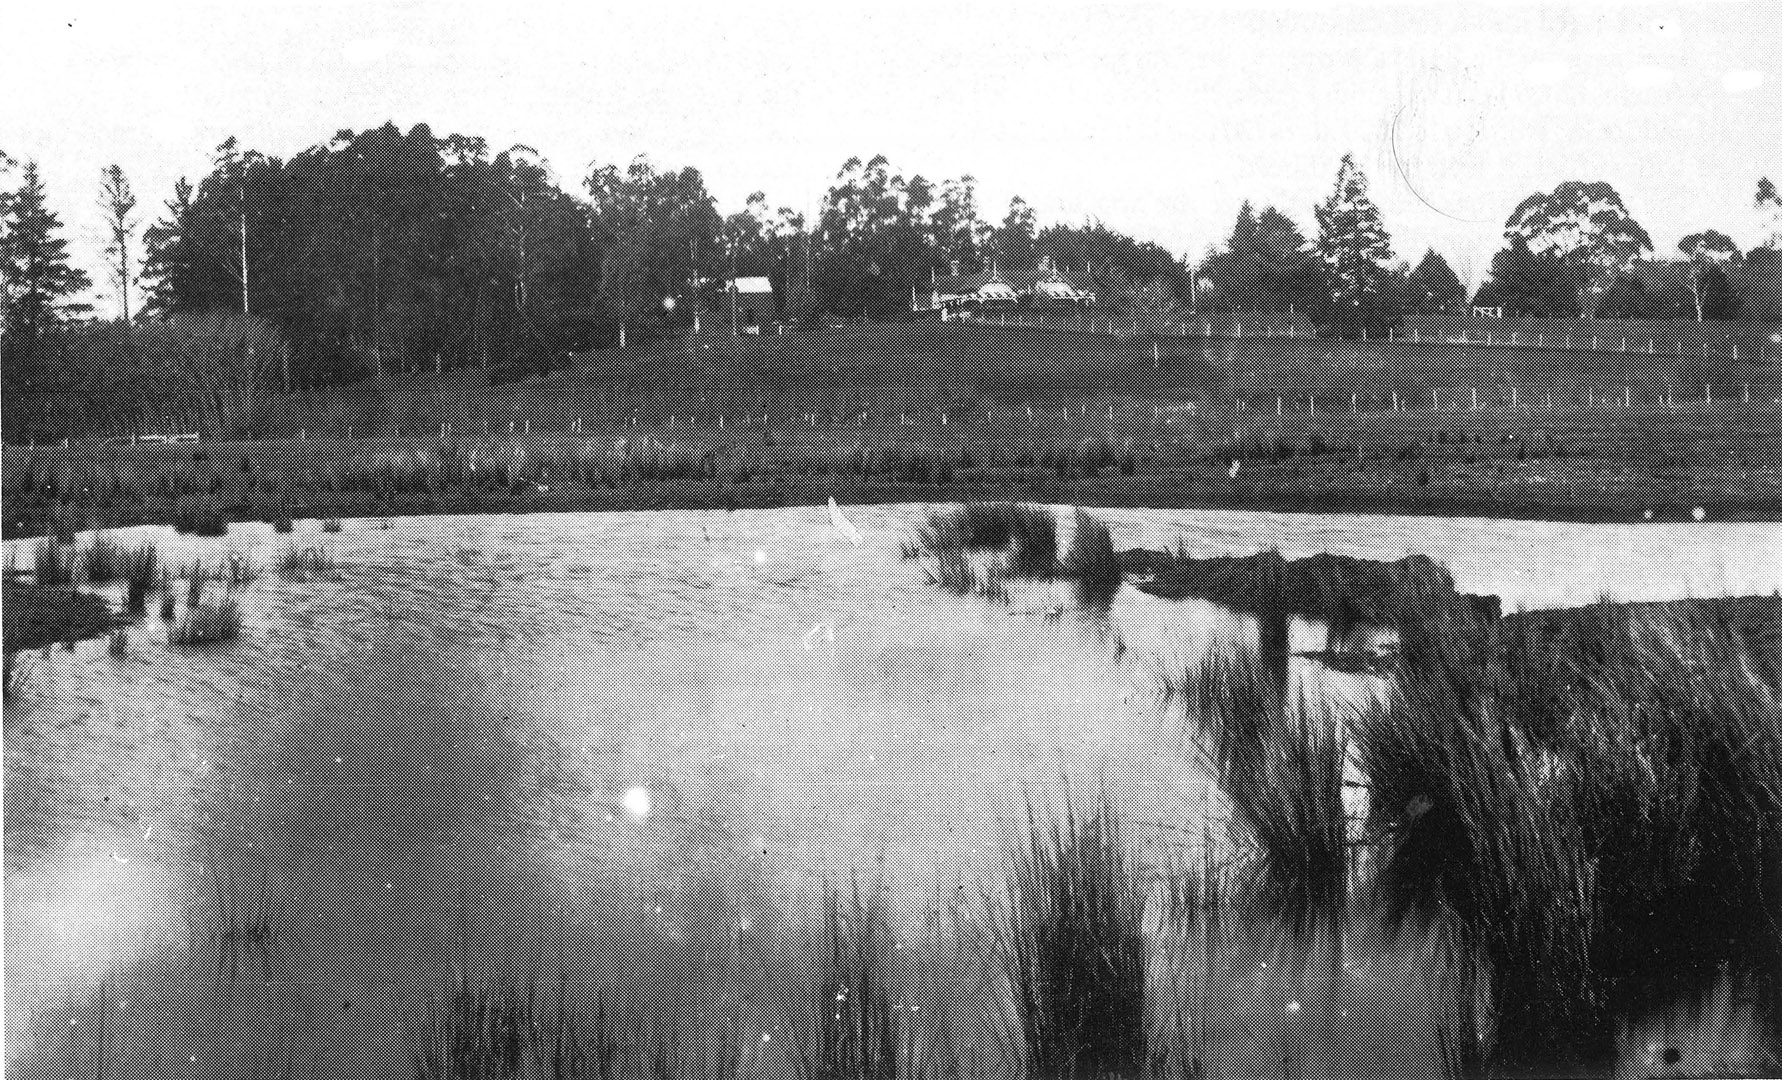 The Gordon homestead showing unclaimed swamp in the foreground